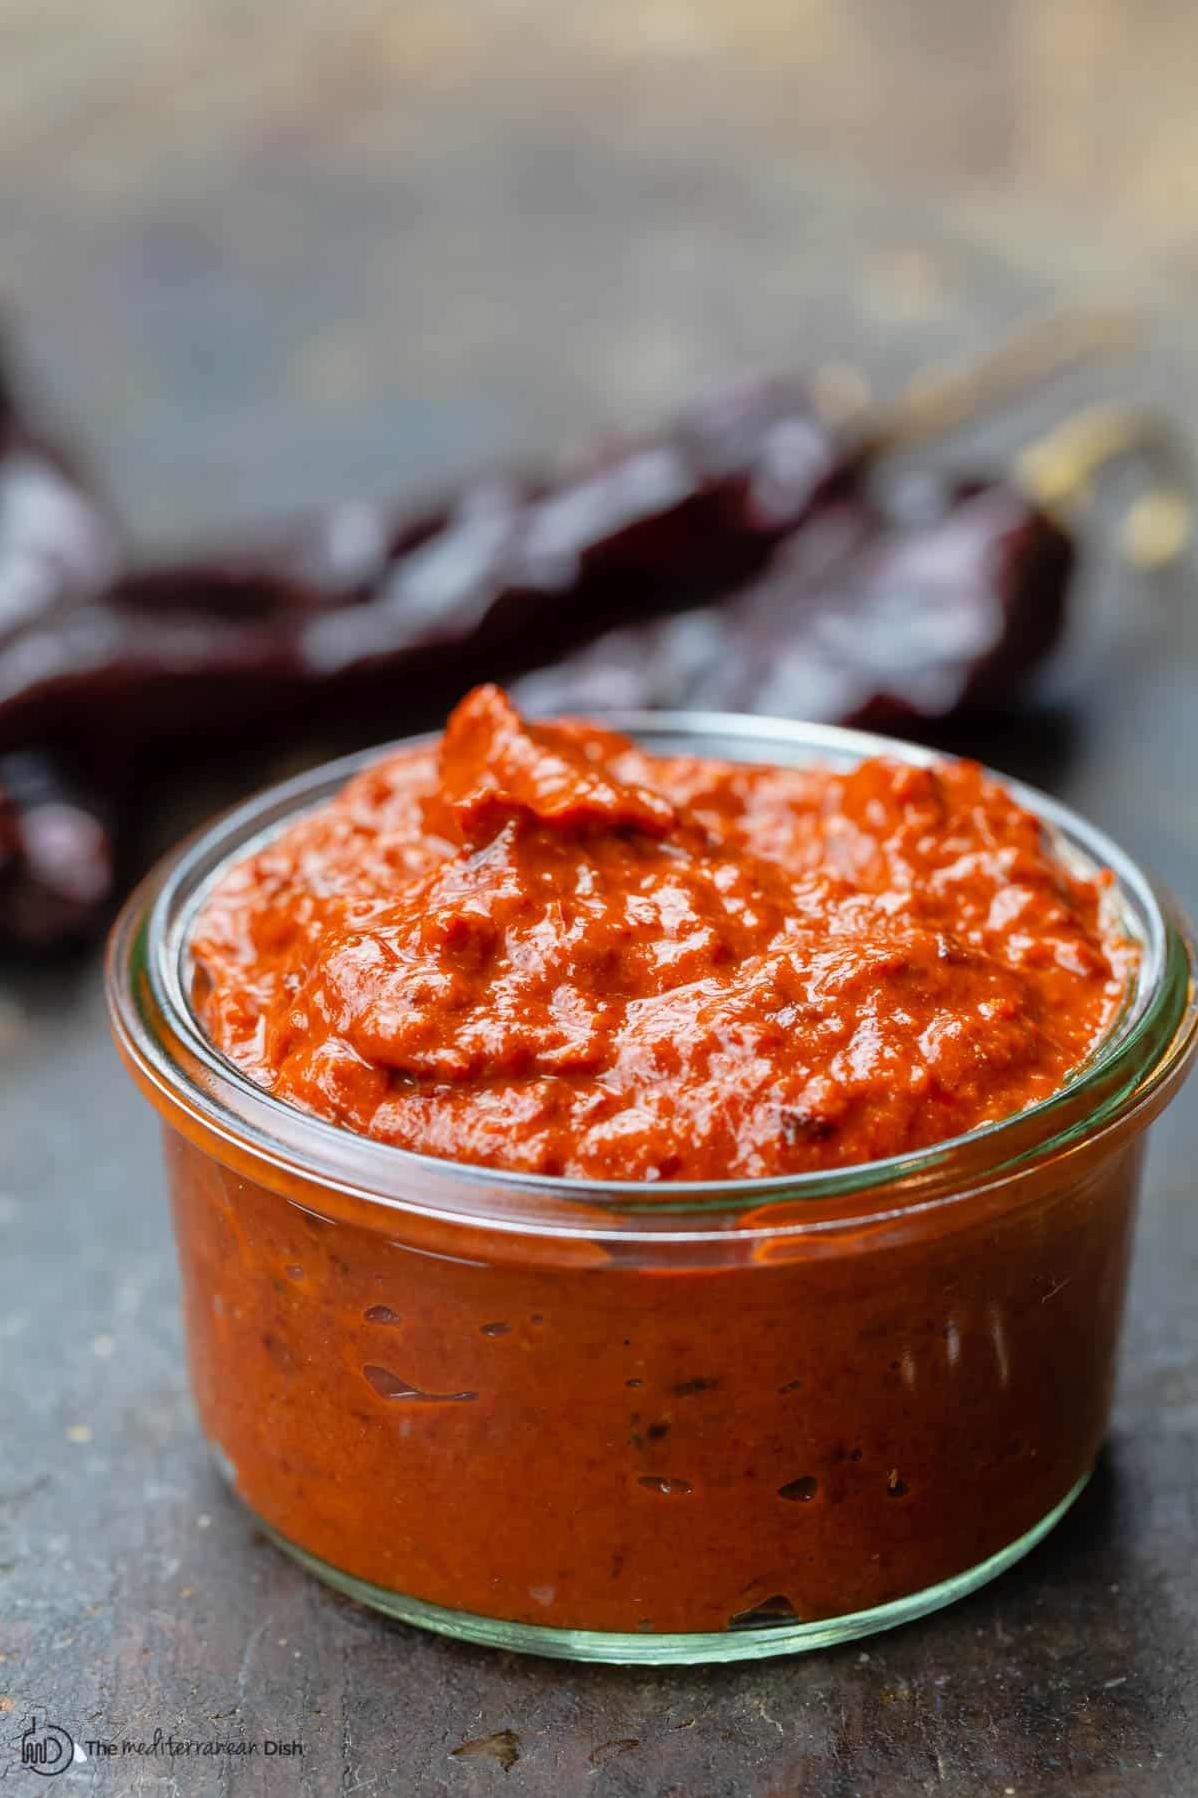  This versatile paste is perfect for marinating, grilling, or dipping